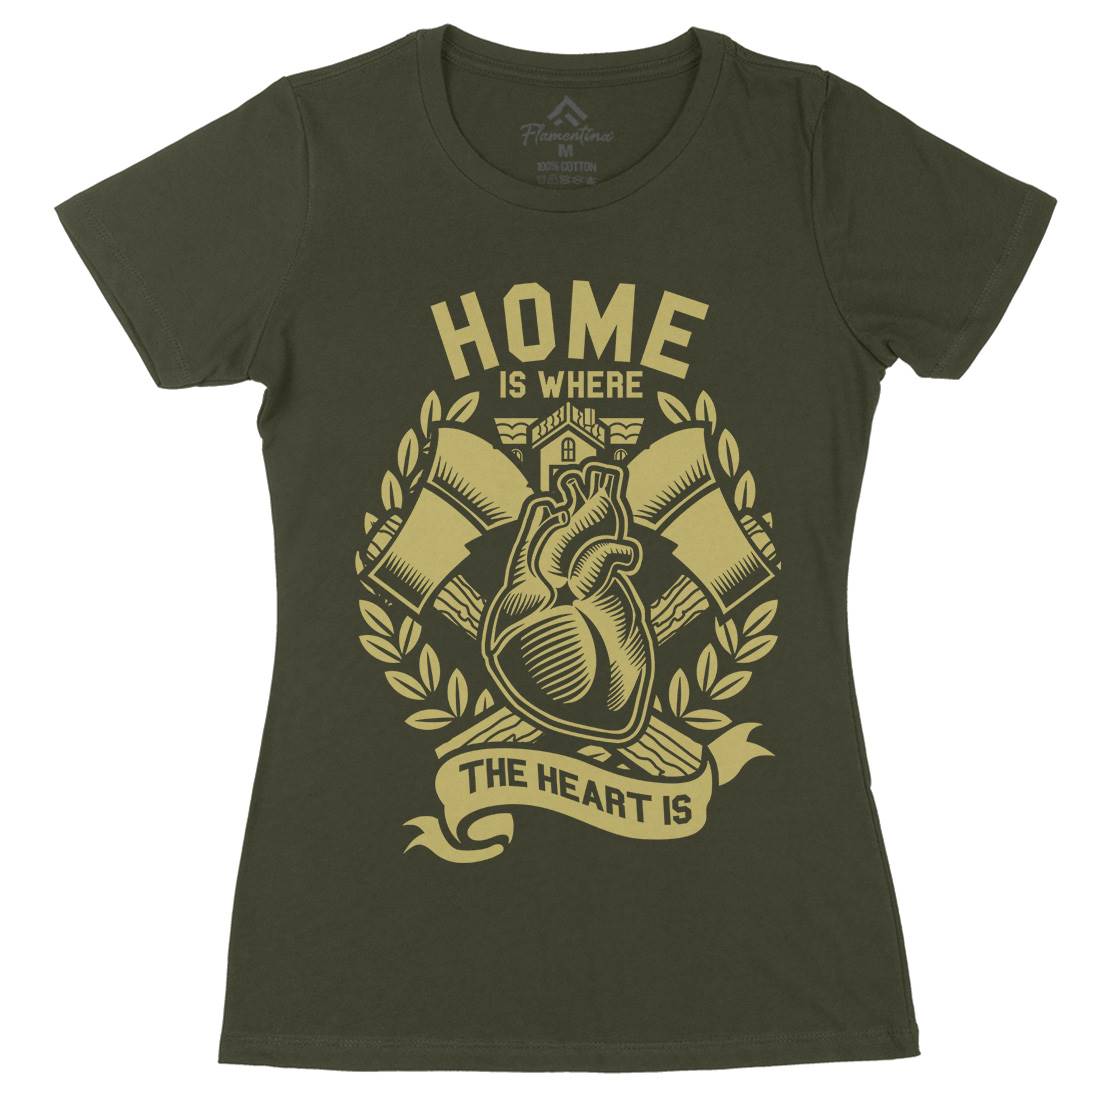 Home Womens Organic Crew Neck T-Shirt Quotes A241